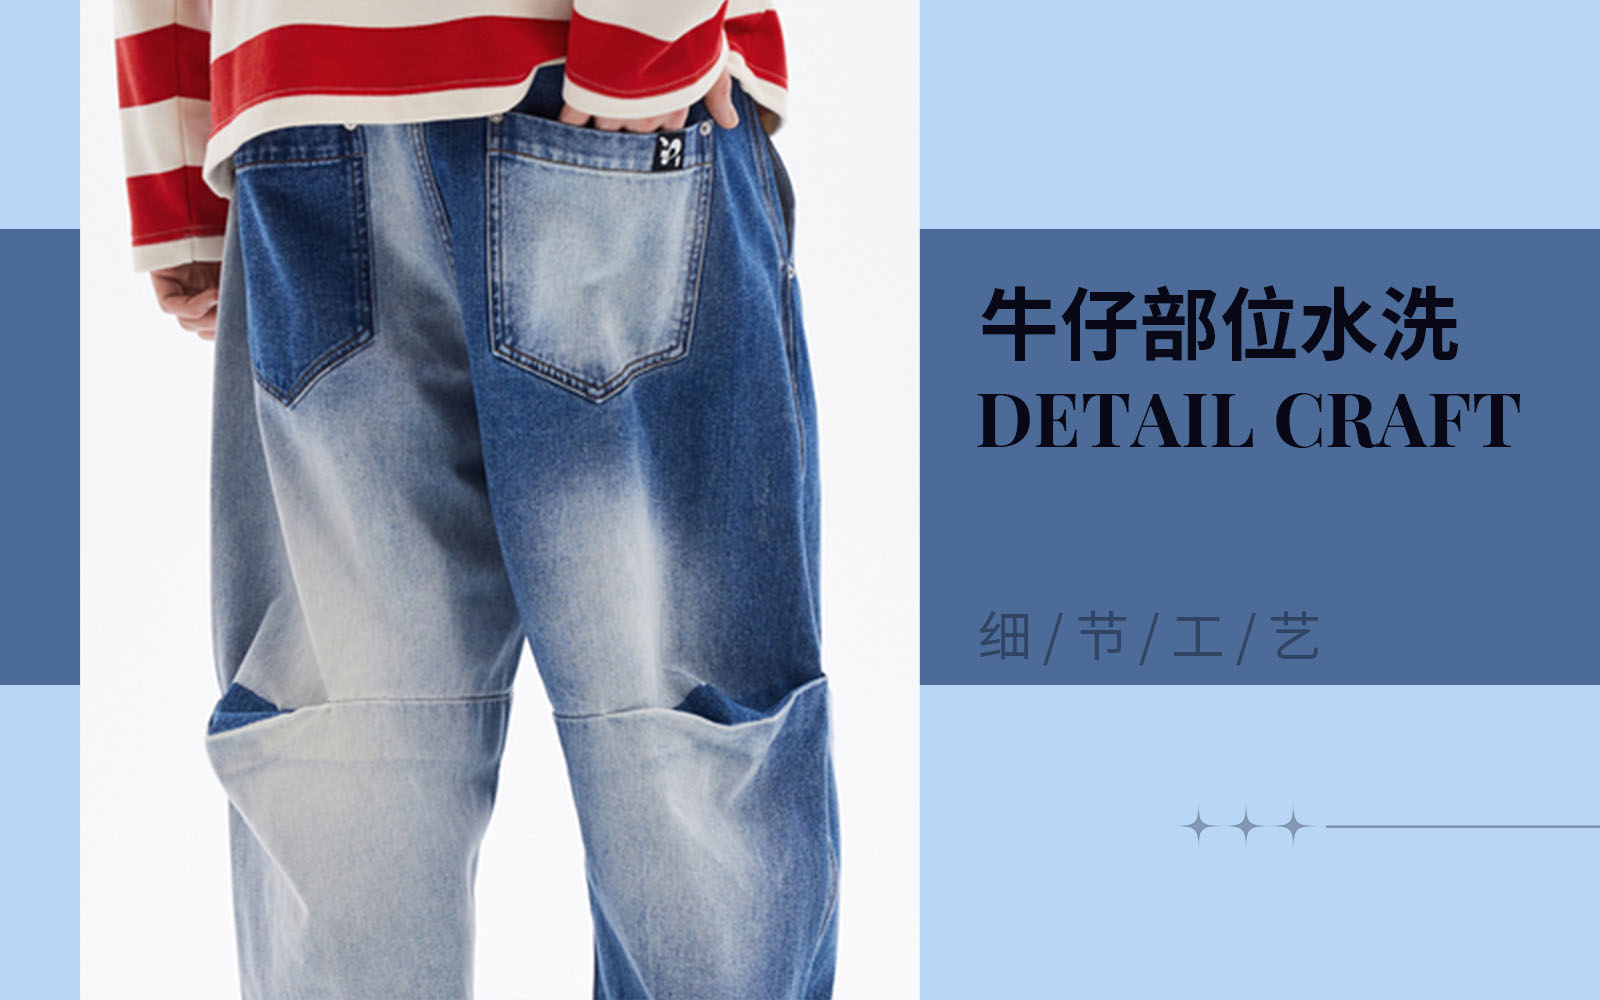 Position of Wash -- The Detail & Craft Trend for Denim